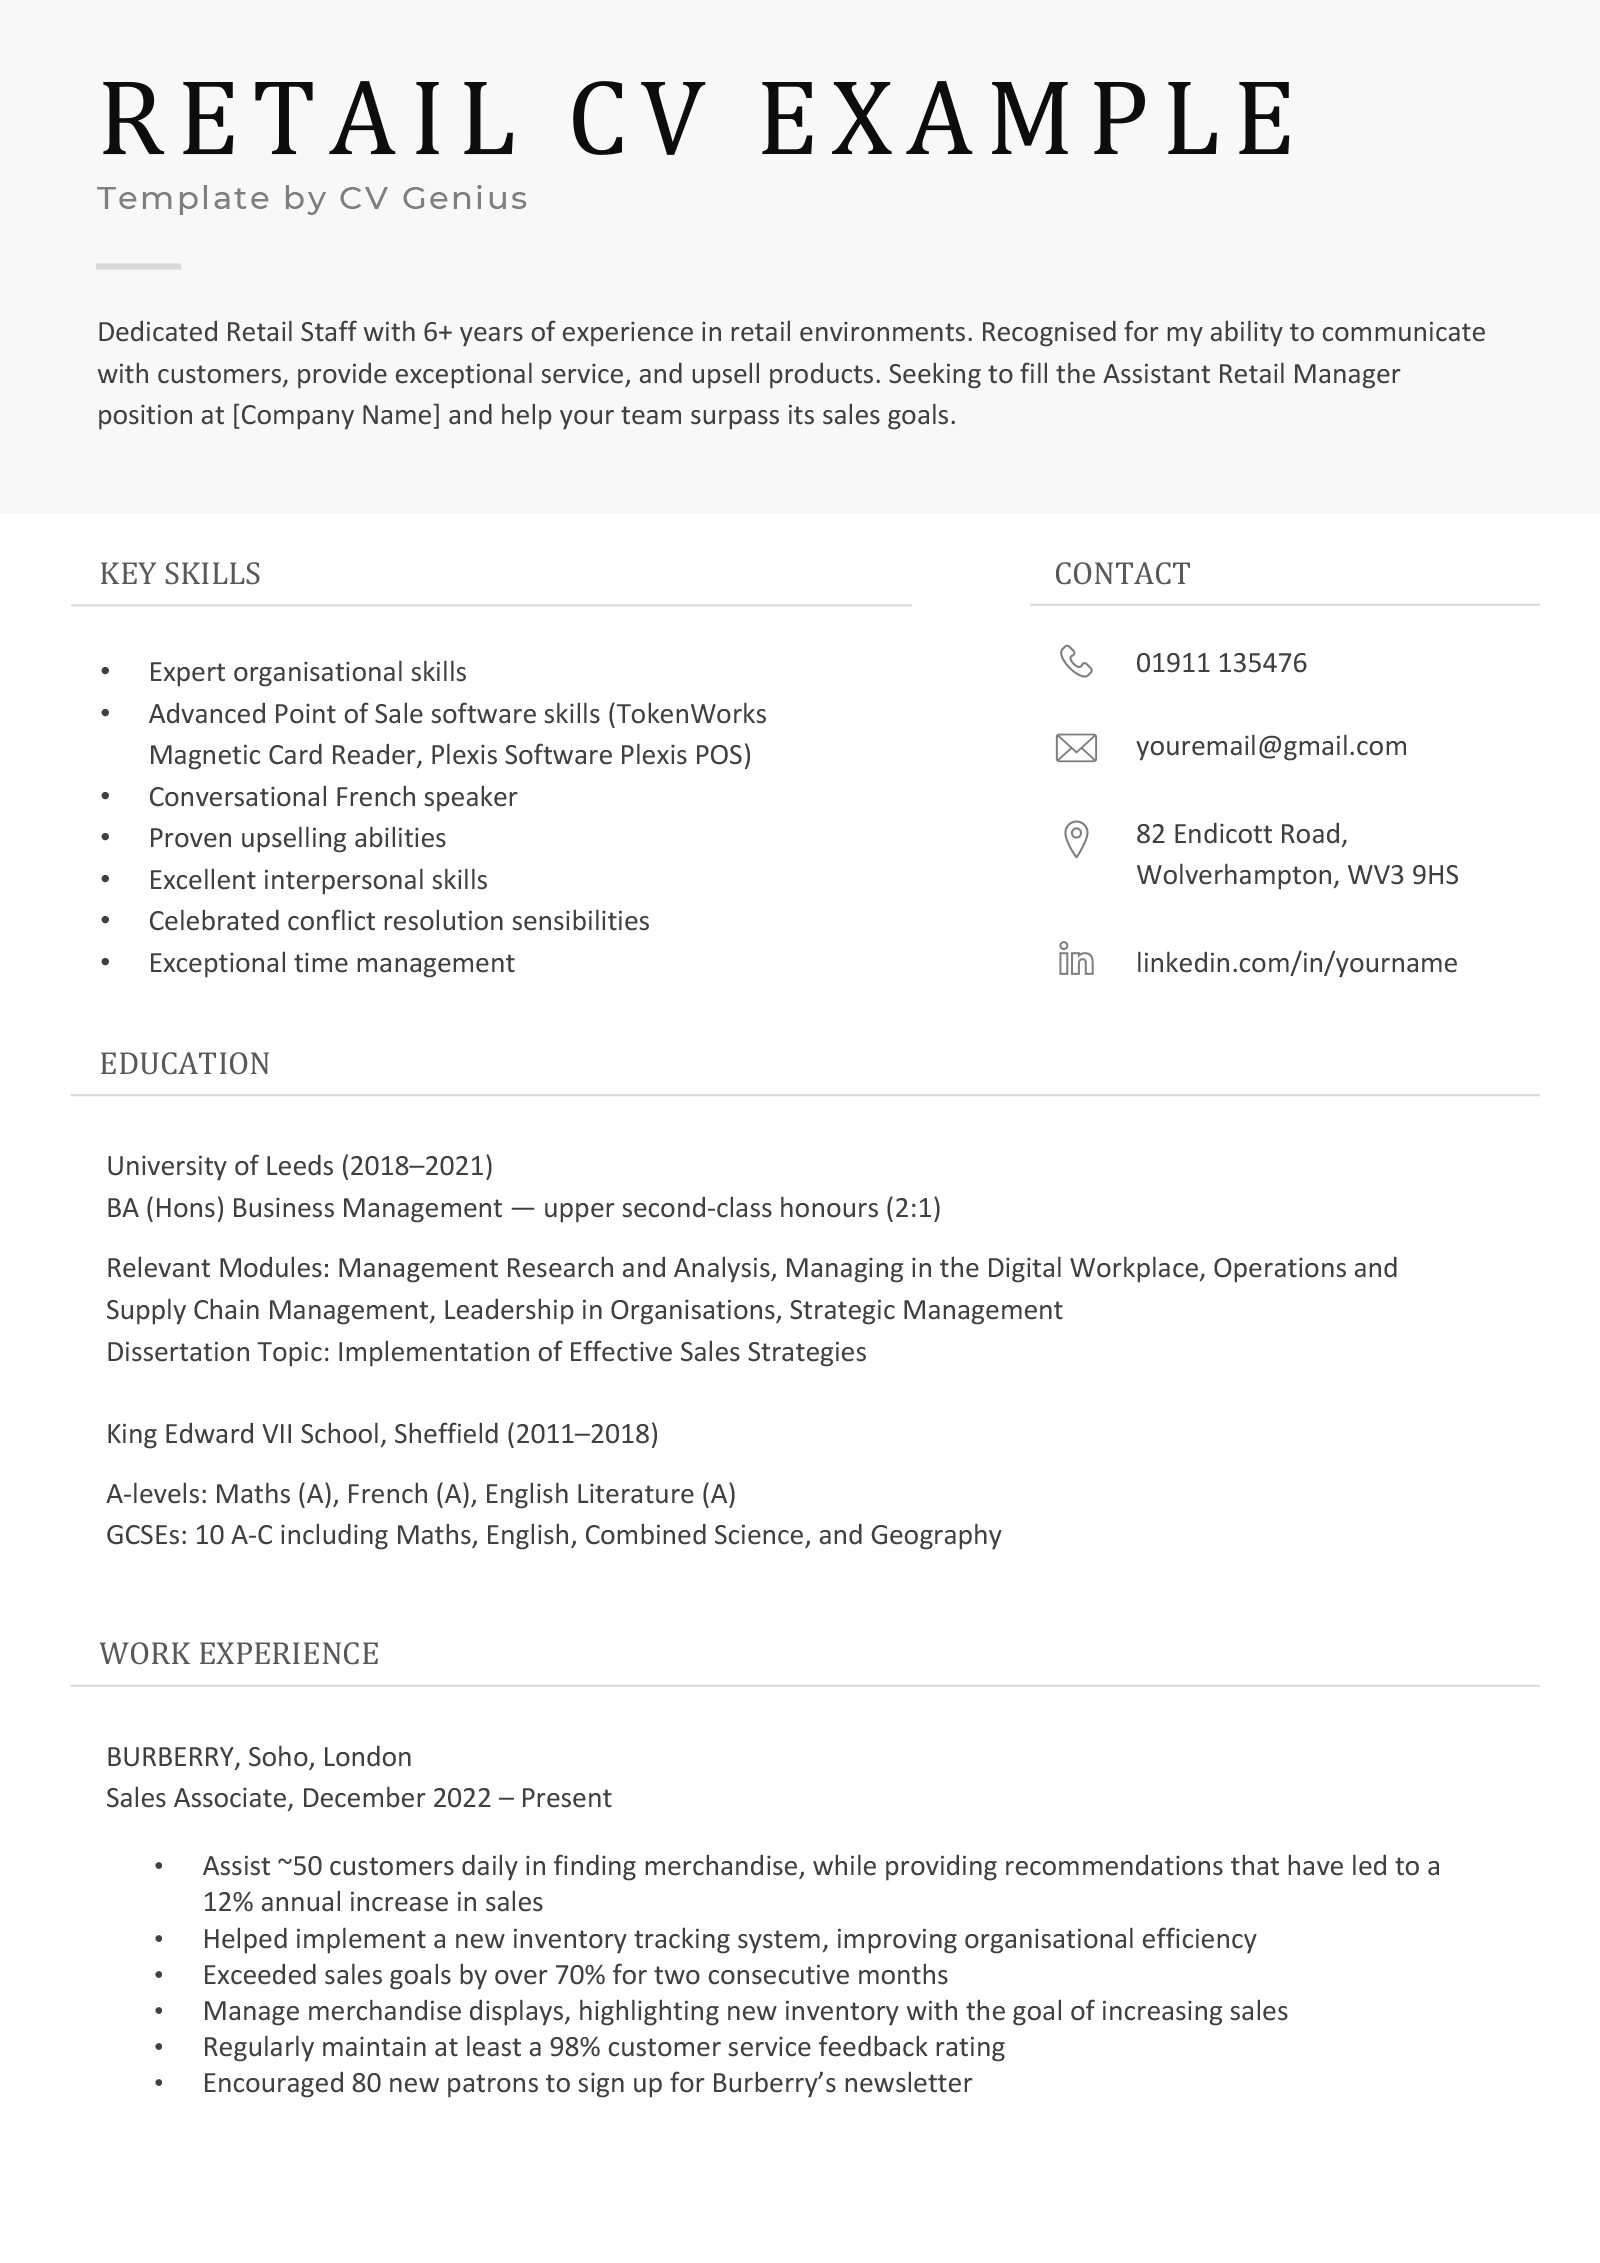 cv personal statement for retail